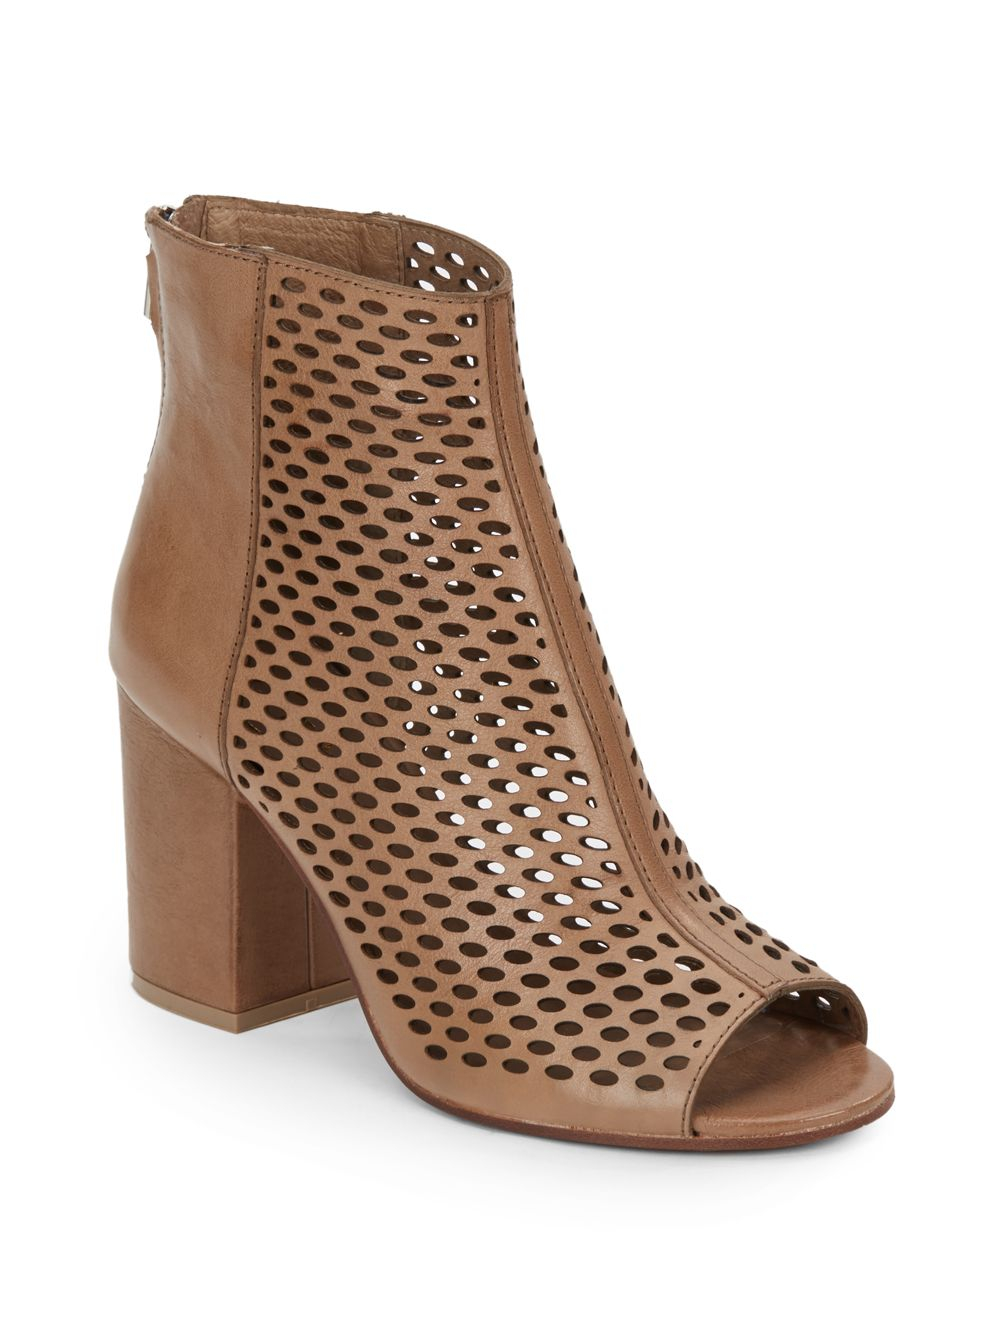 Ash Fancy Perforated Leather Peep Toe Ankle Boots in Brown | Lyst